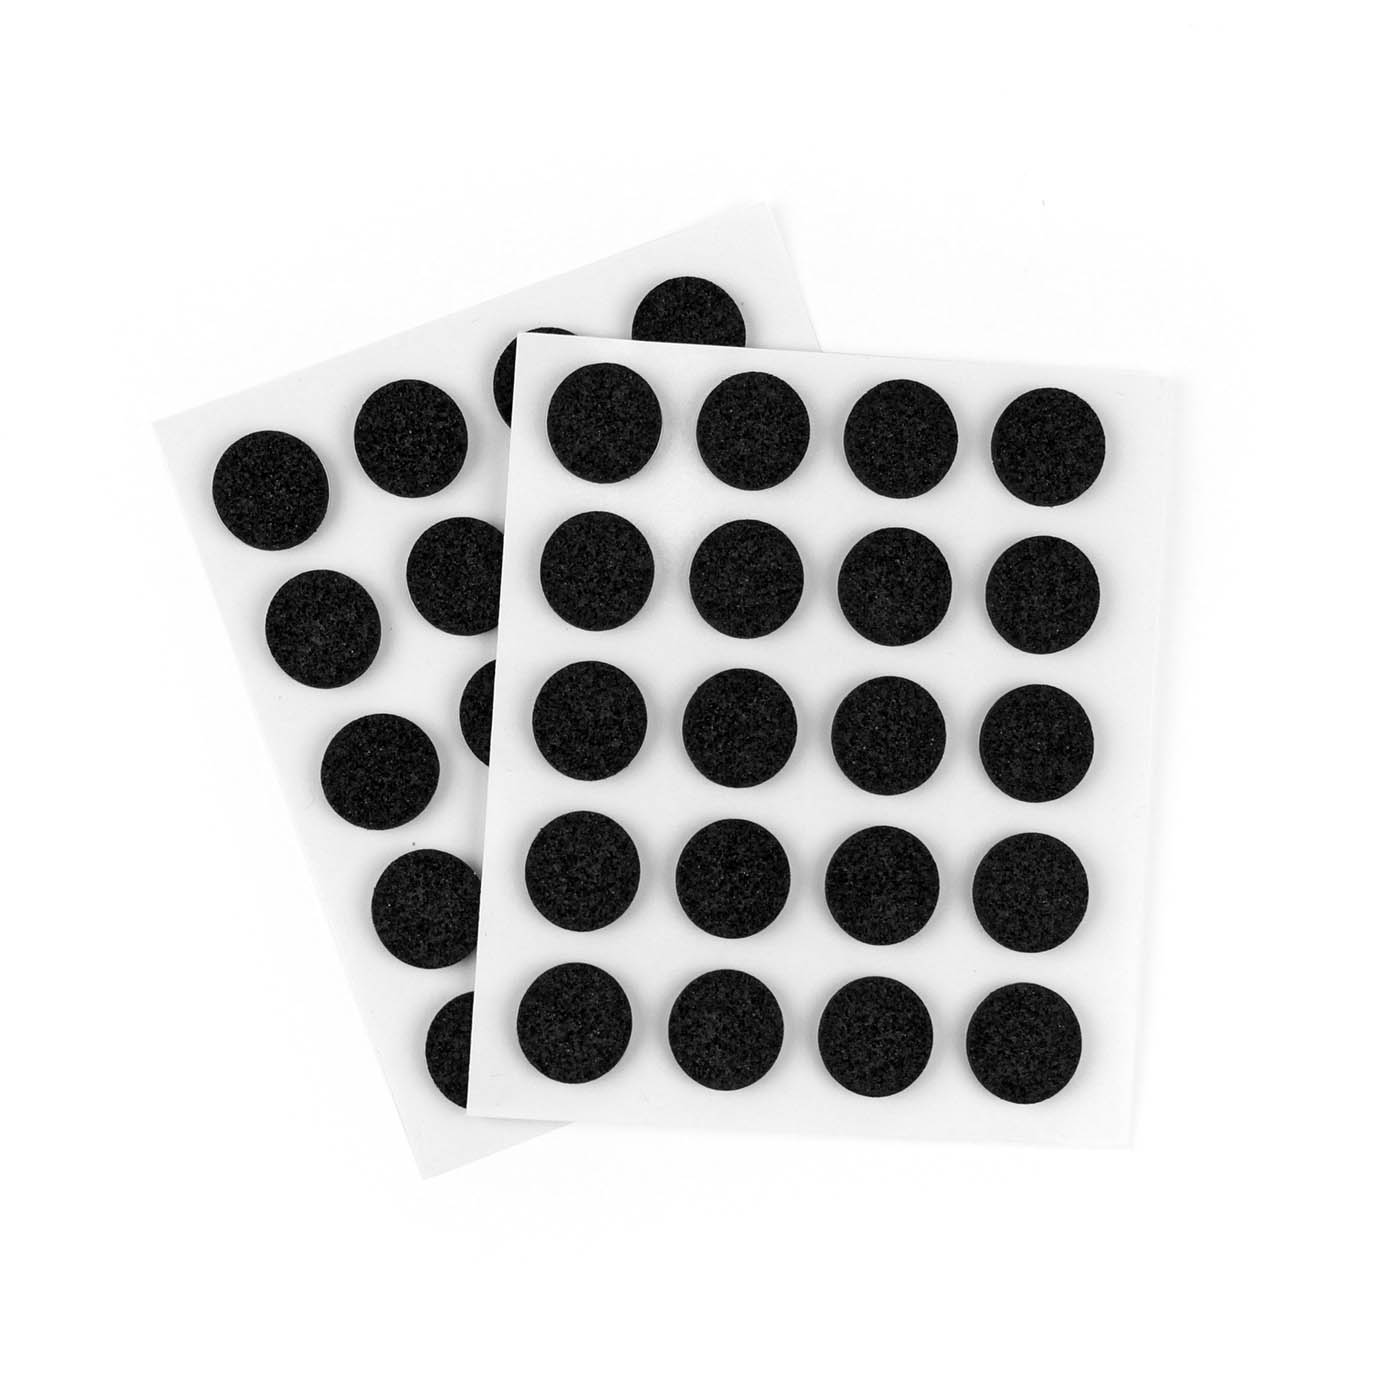 Self Adhesive Cabinet Door Bumpers - Noise Stopper -  Wall Protection, Drawers, Cupboards, Cutting Boards, Glass Tops, Picture Frames, Kitchen Furniture - Black/40Pcs